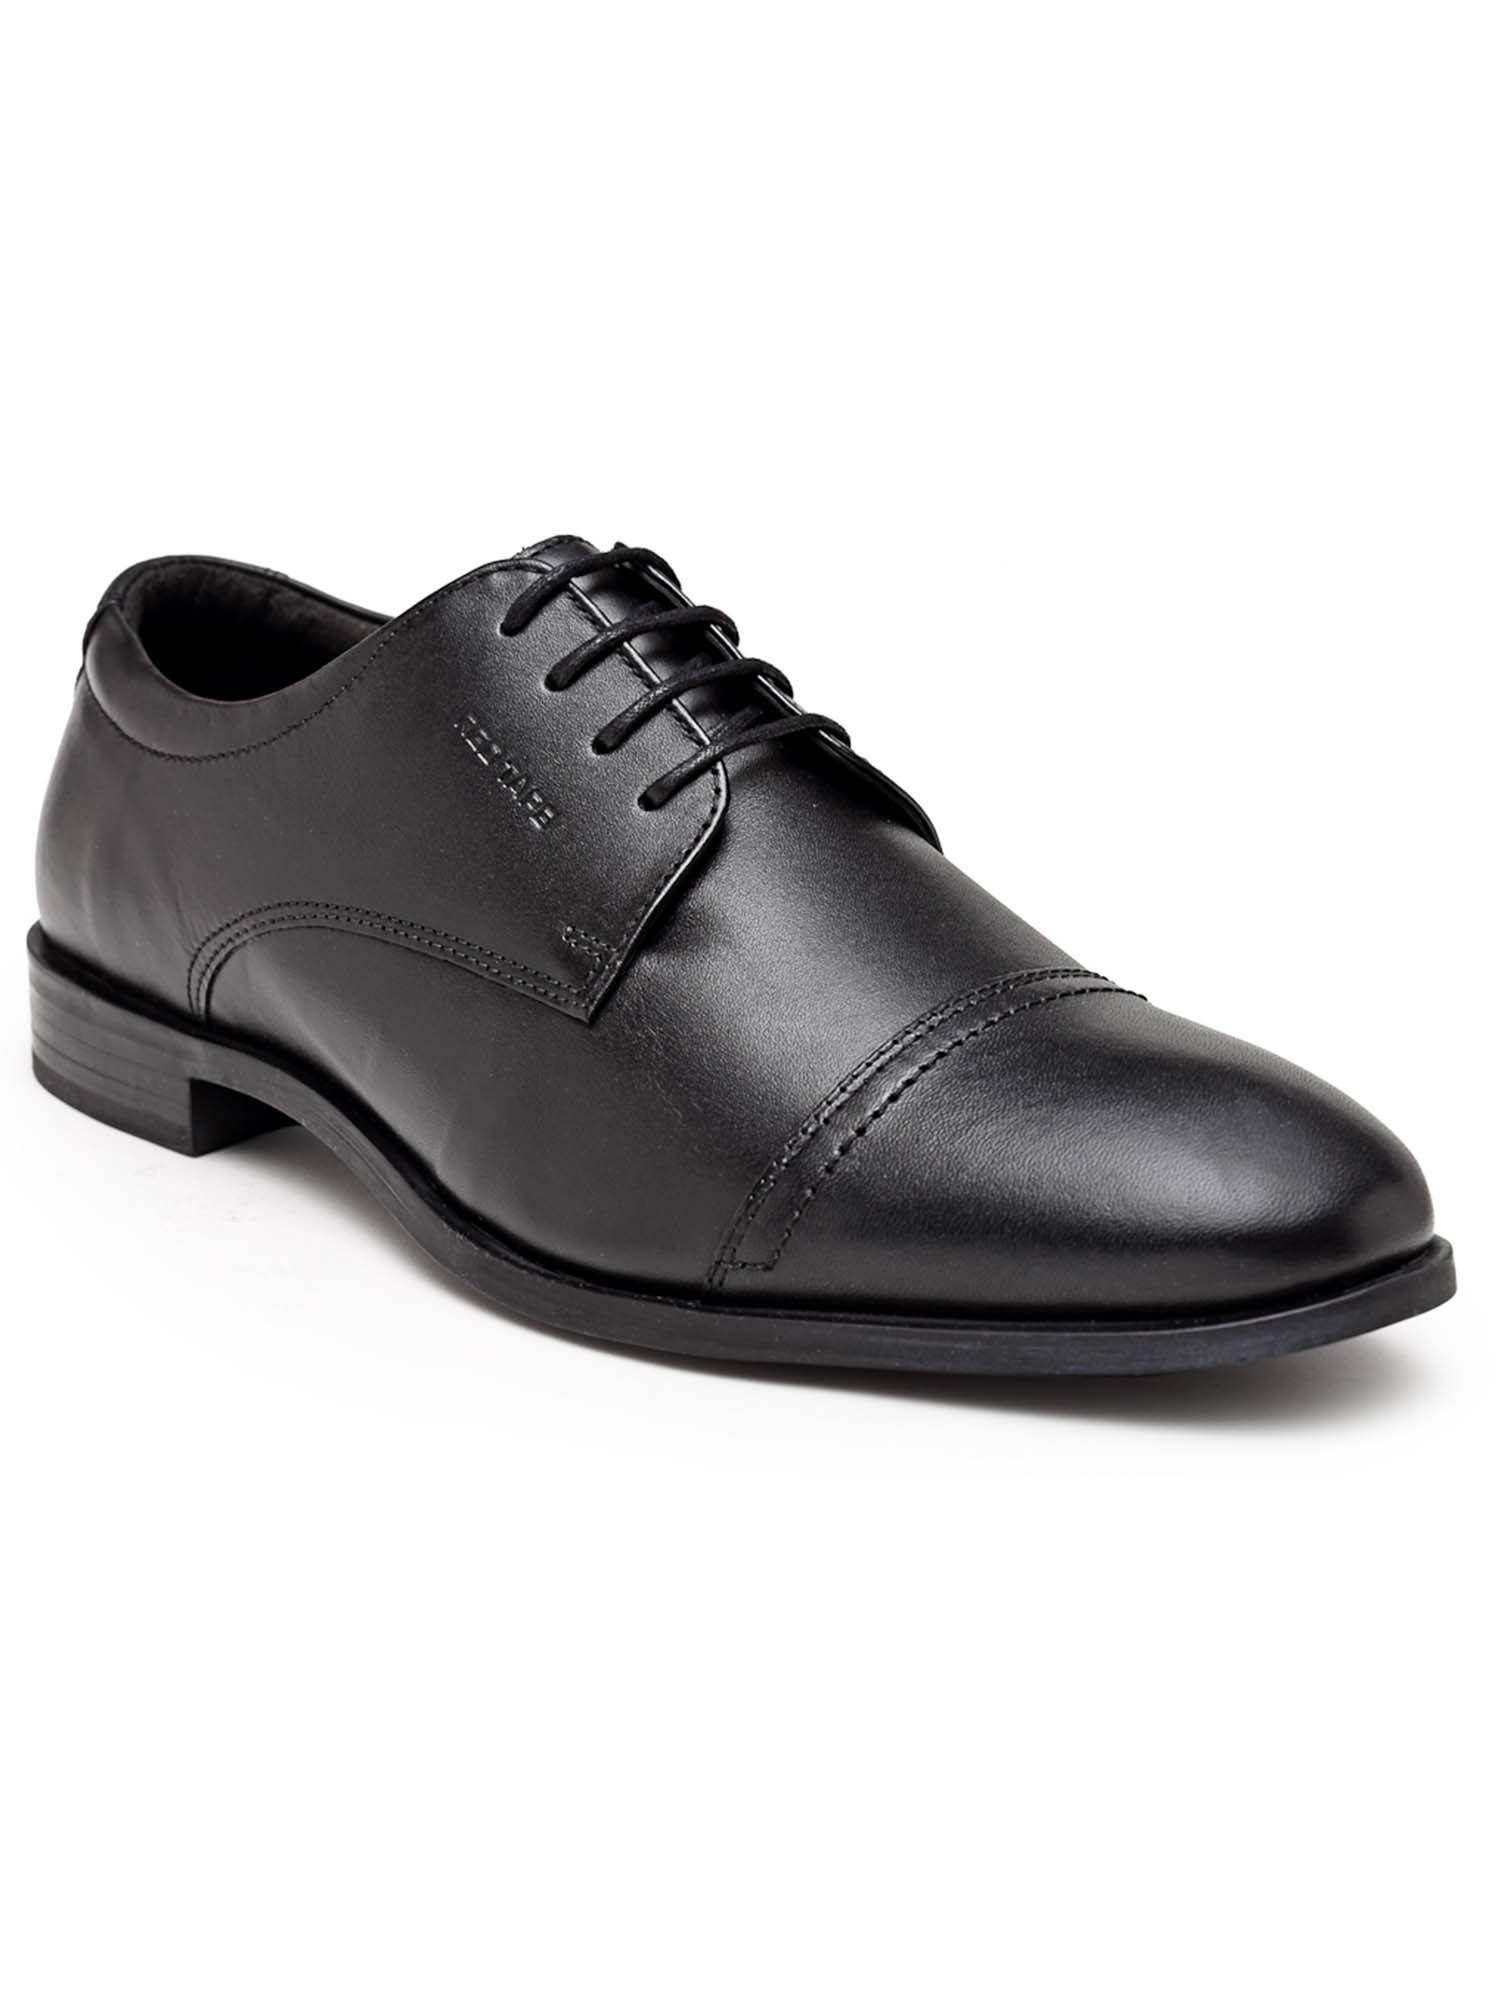 solid black derby shoes